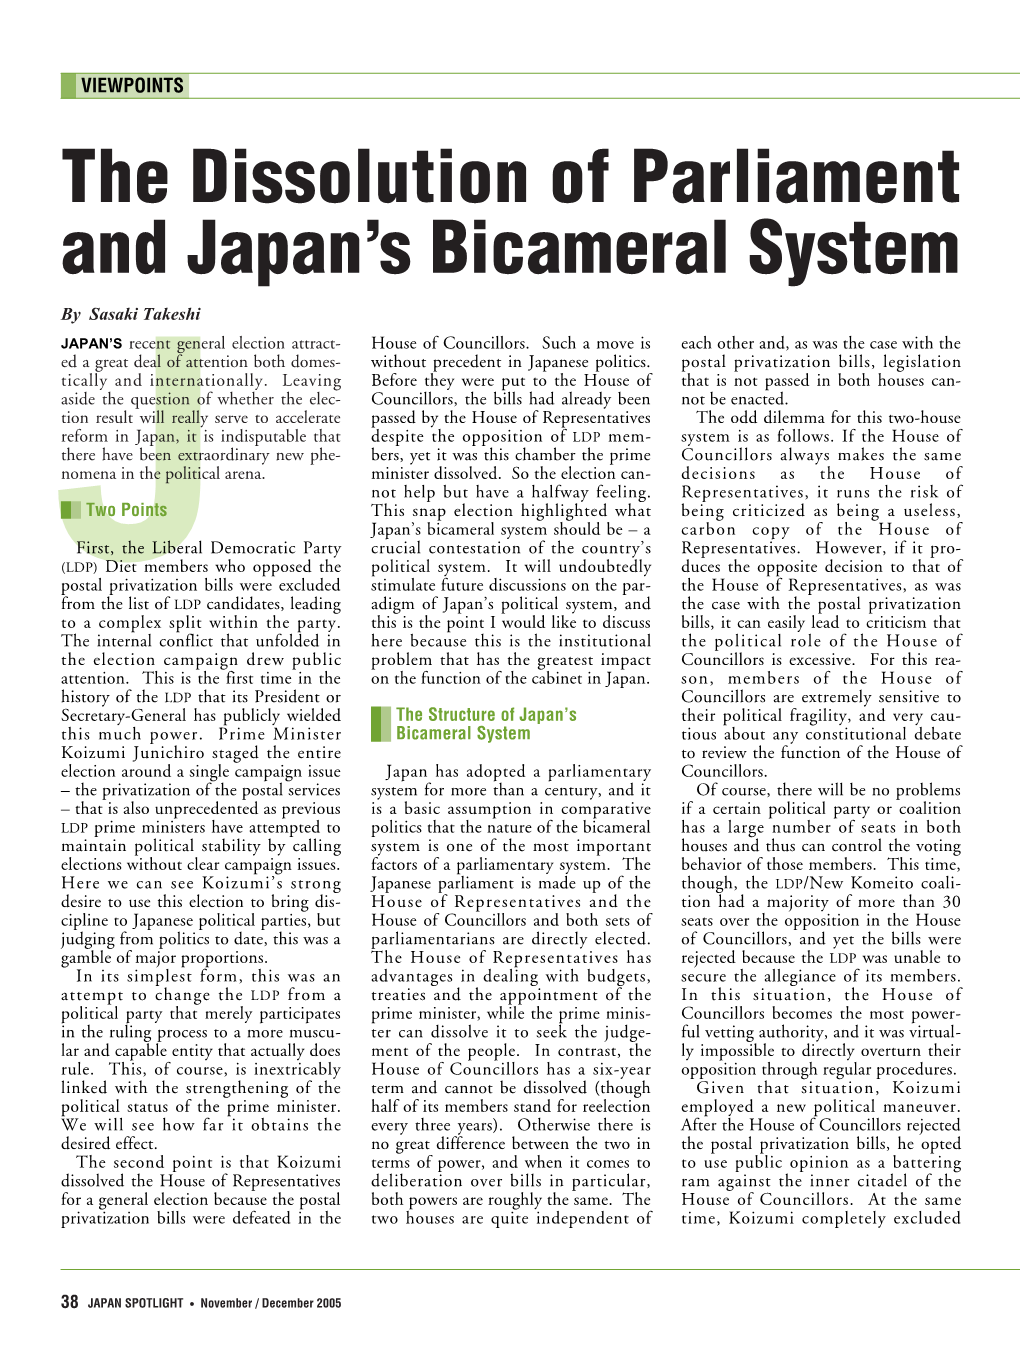 The Dissolution of Parliament and Japan's Bicameral System